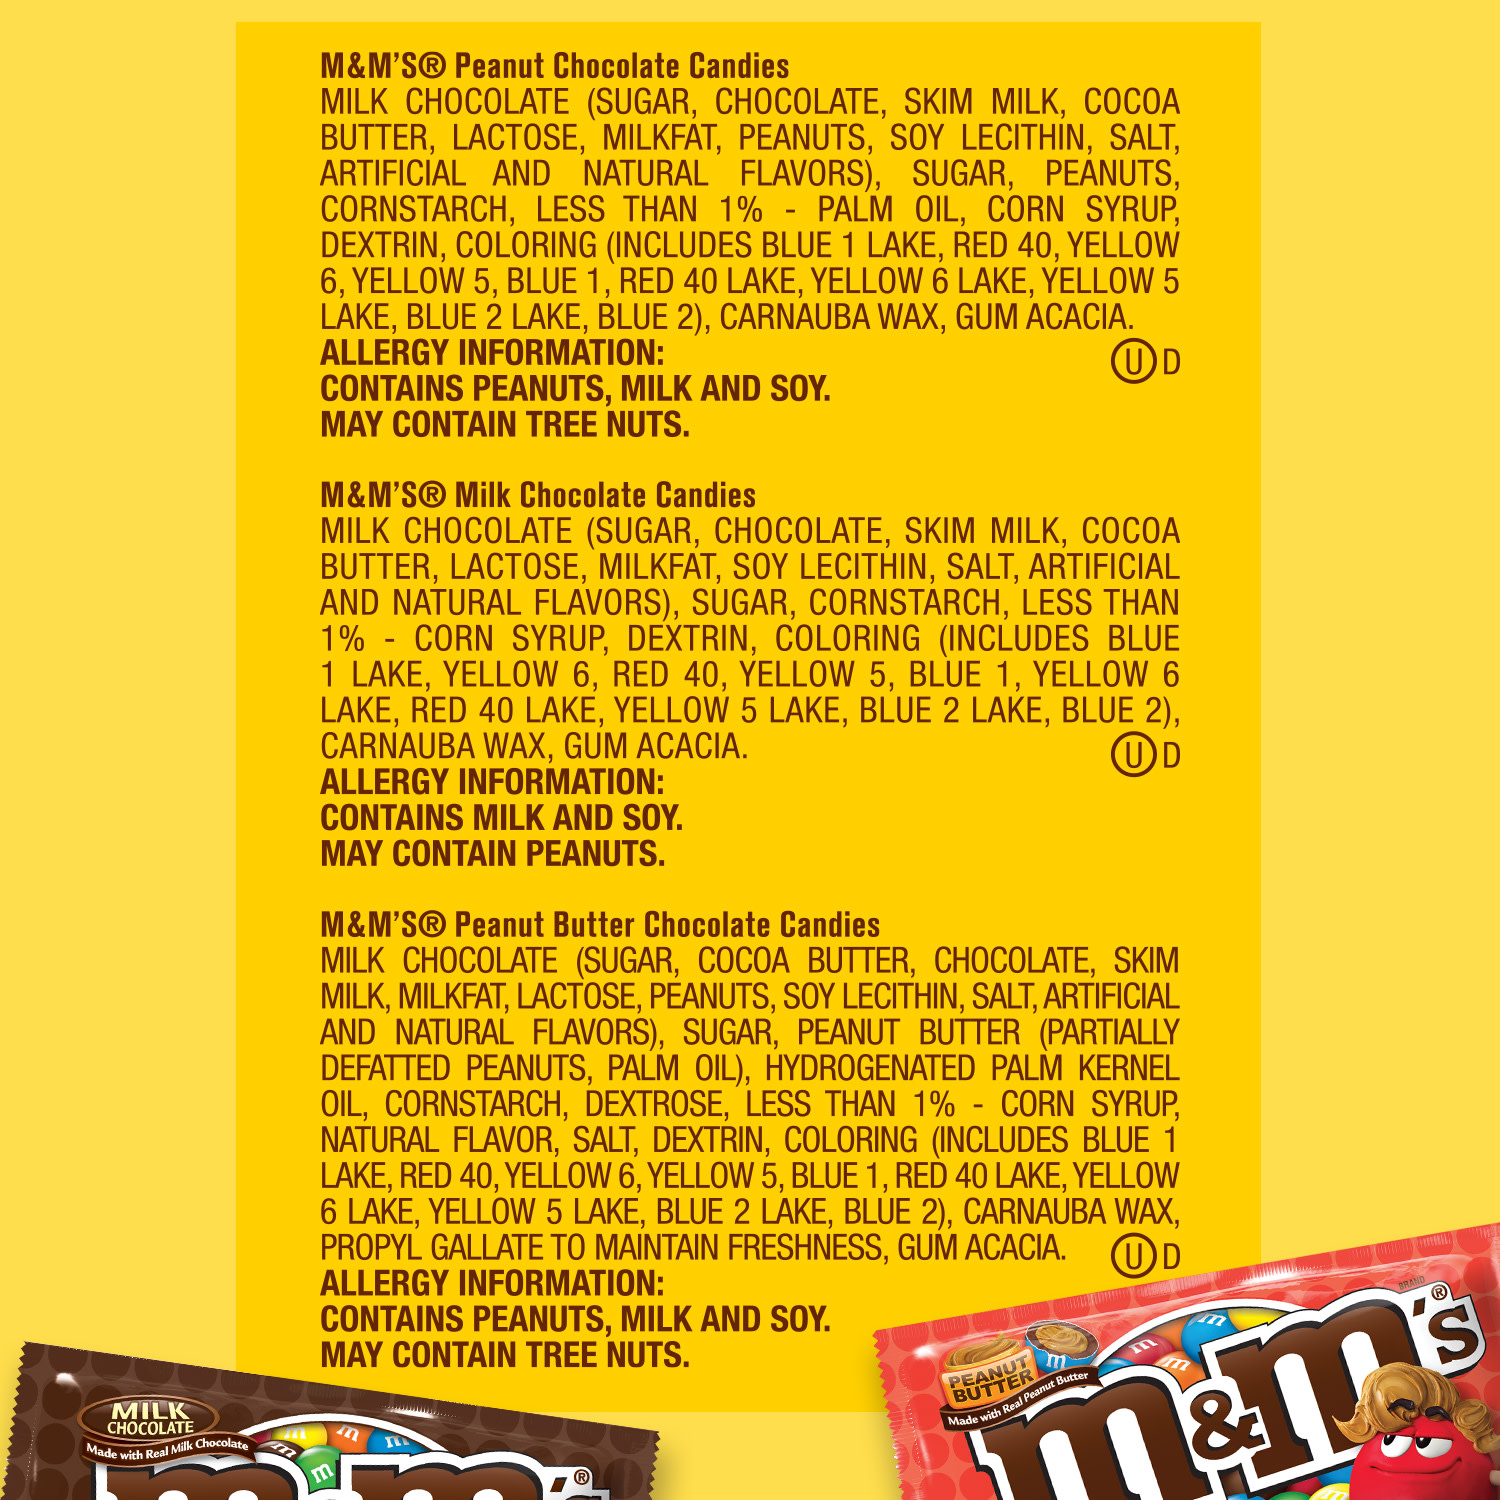 M&M's Variety Pack Full Size Milk Chocolate Candy Bars - 18 Ct - image 8 of 14